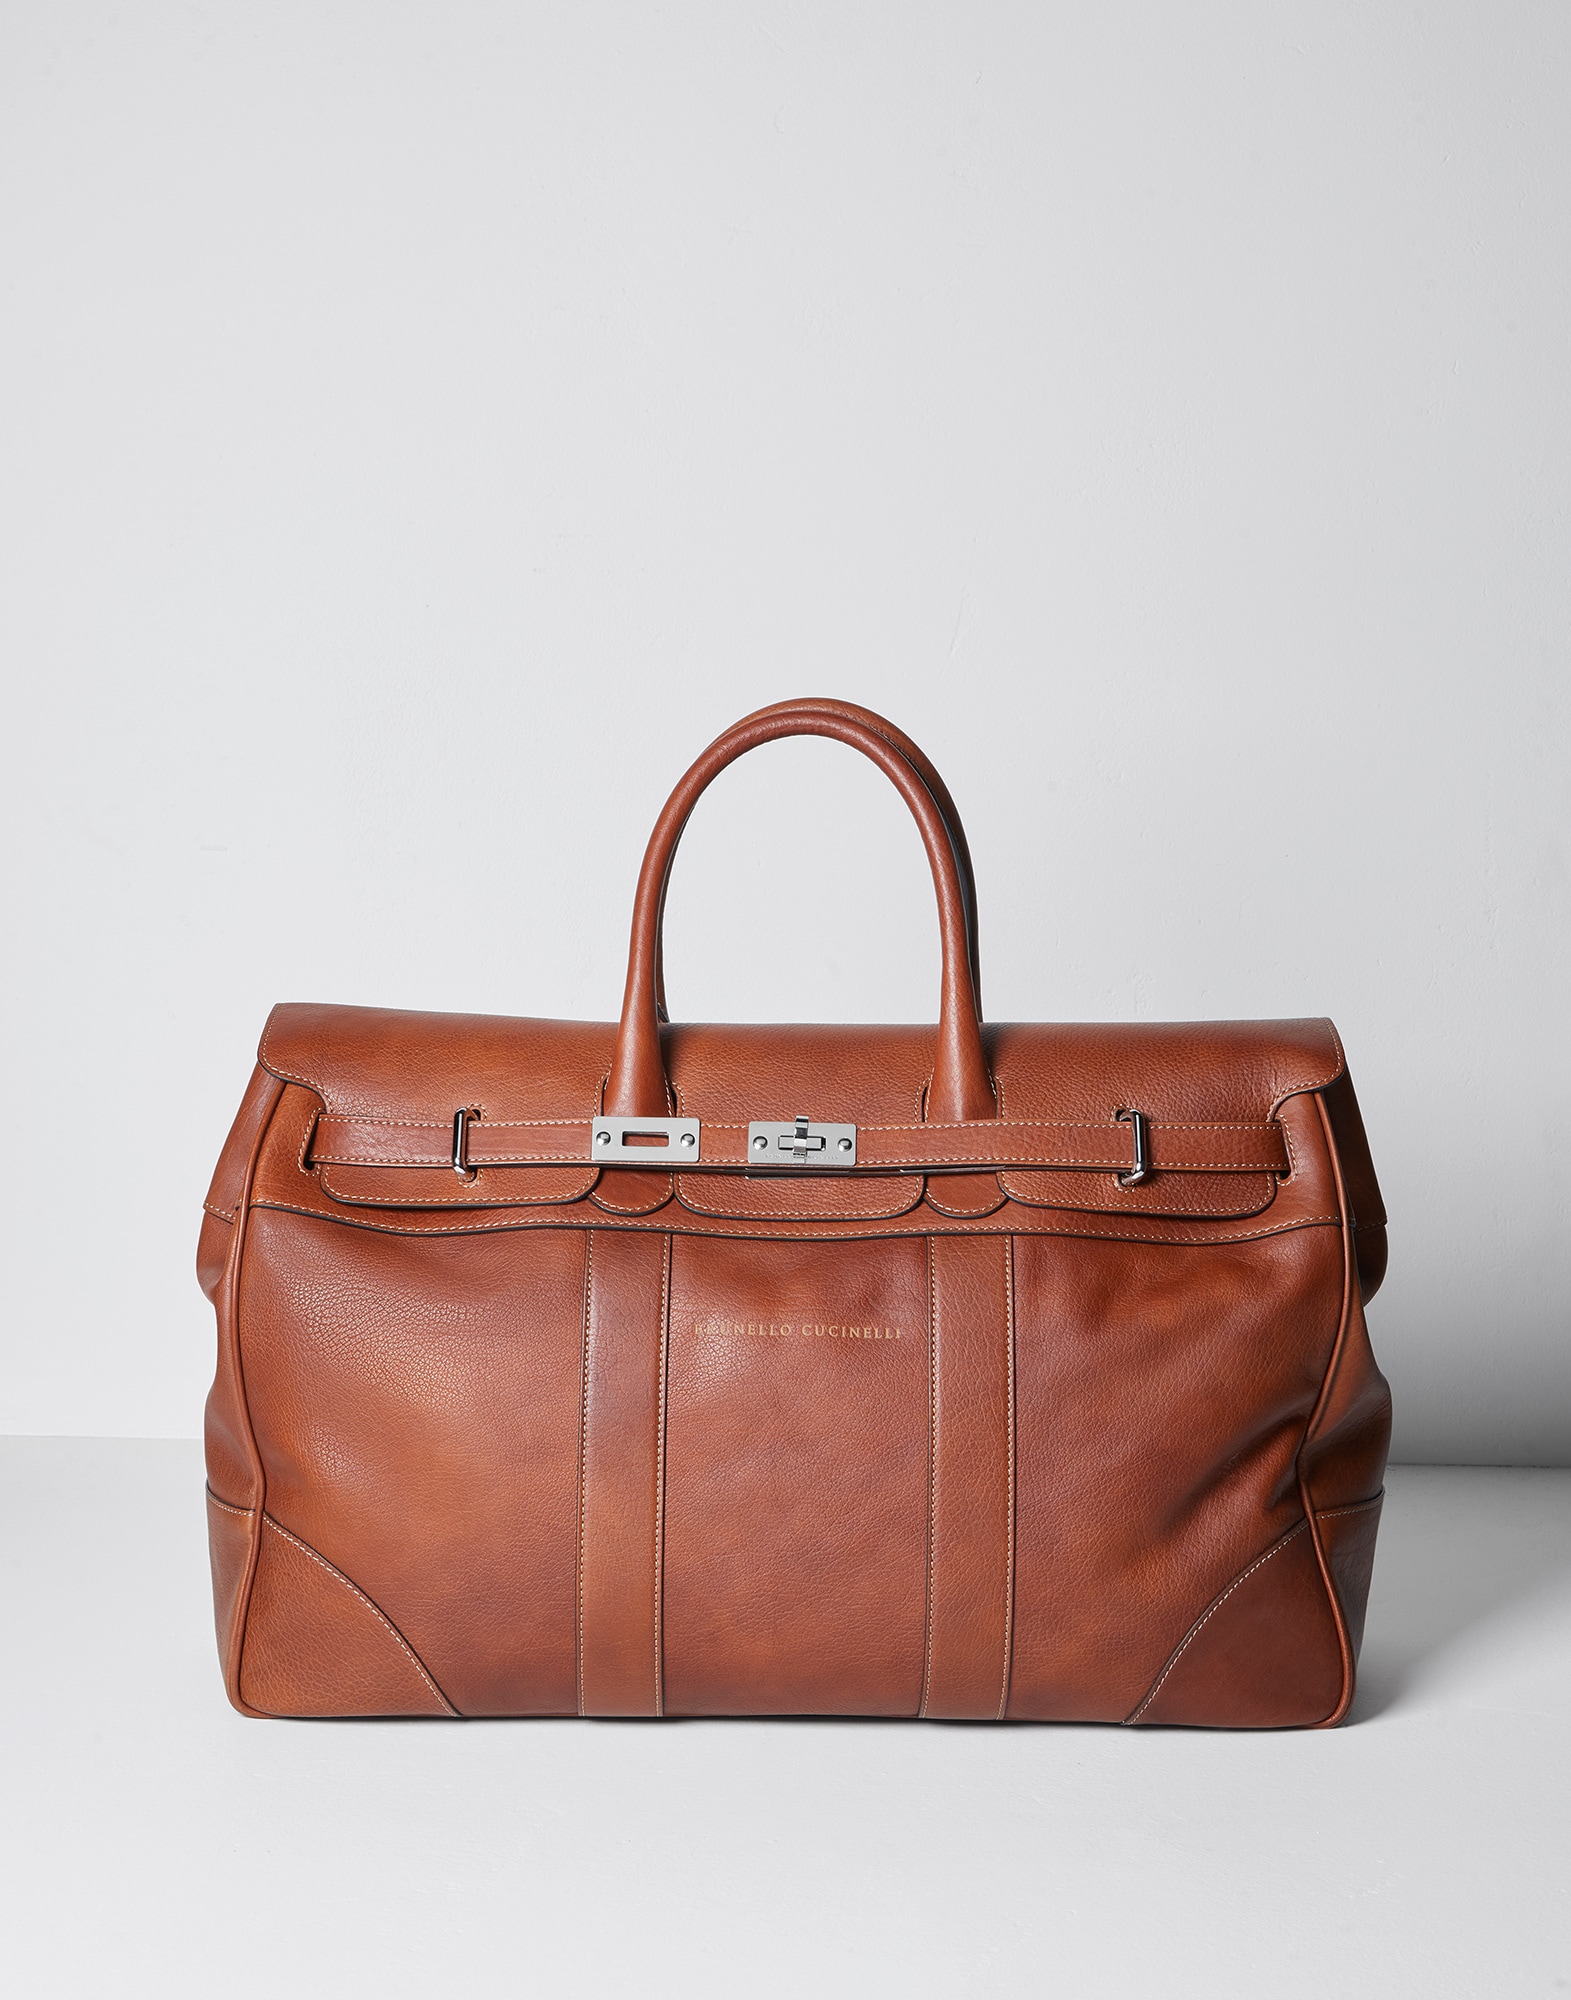 Men's leather bags and backpacks | Brunello Cucinelli